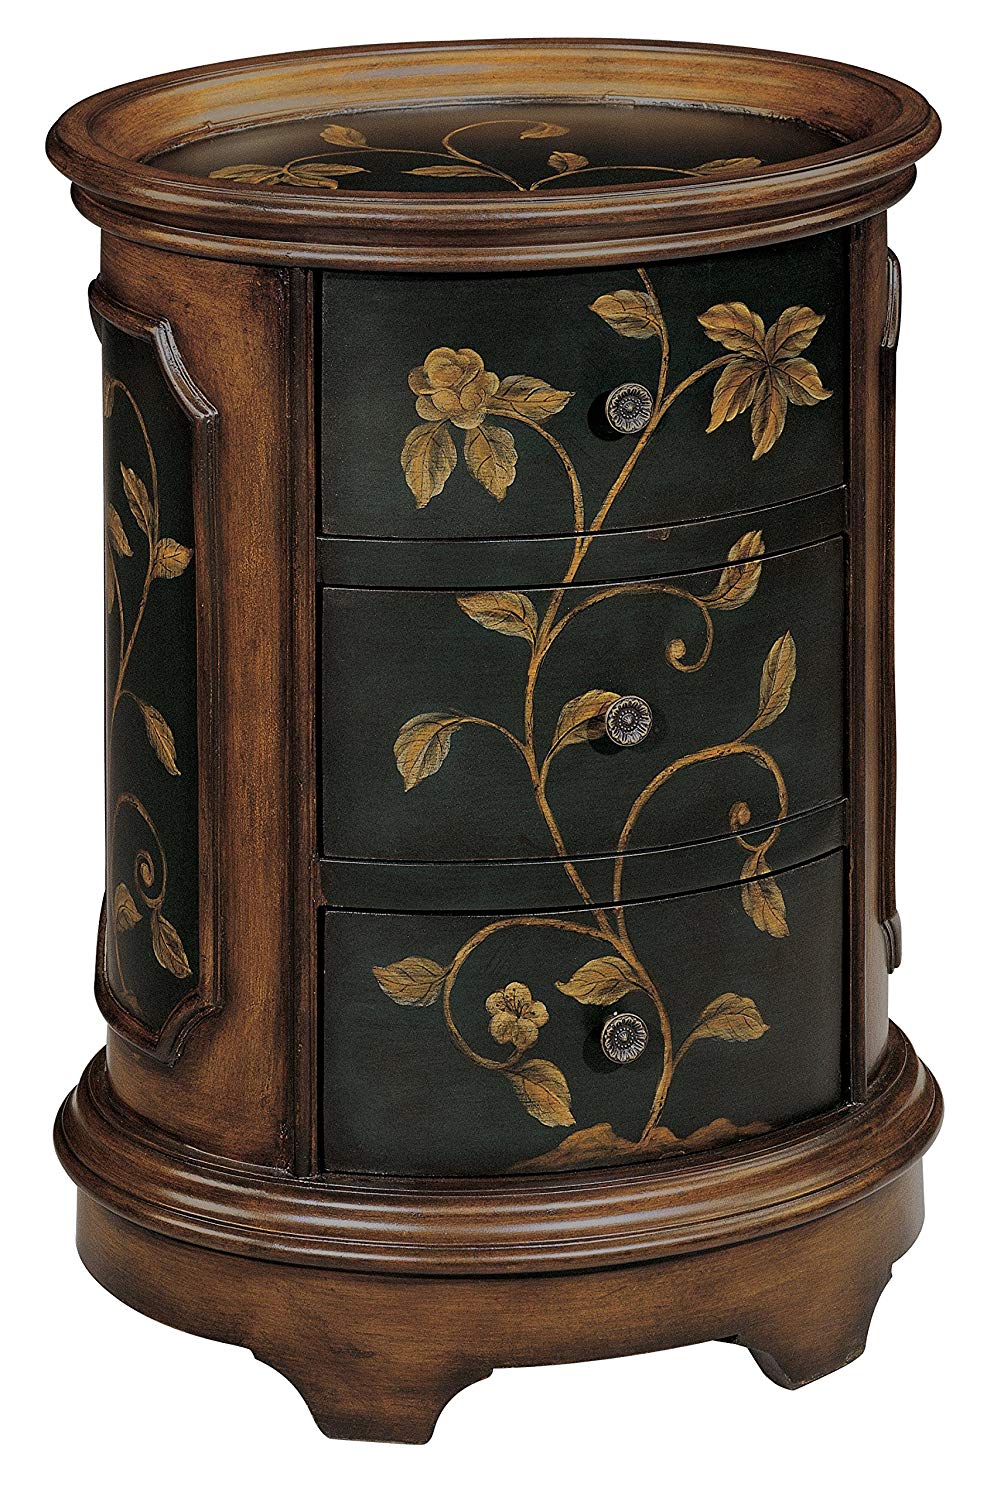 stein world furniture ophelia accent table brown black kitchen dining target patio metal wood bedside decor european short legs top large antique wall clock gold and glass end